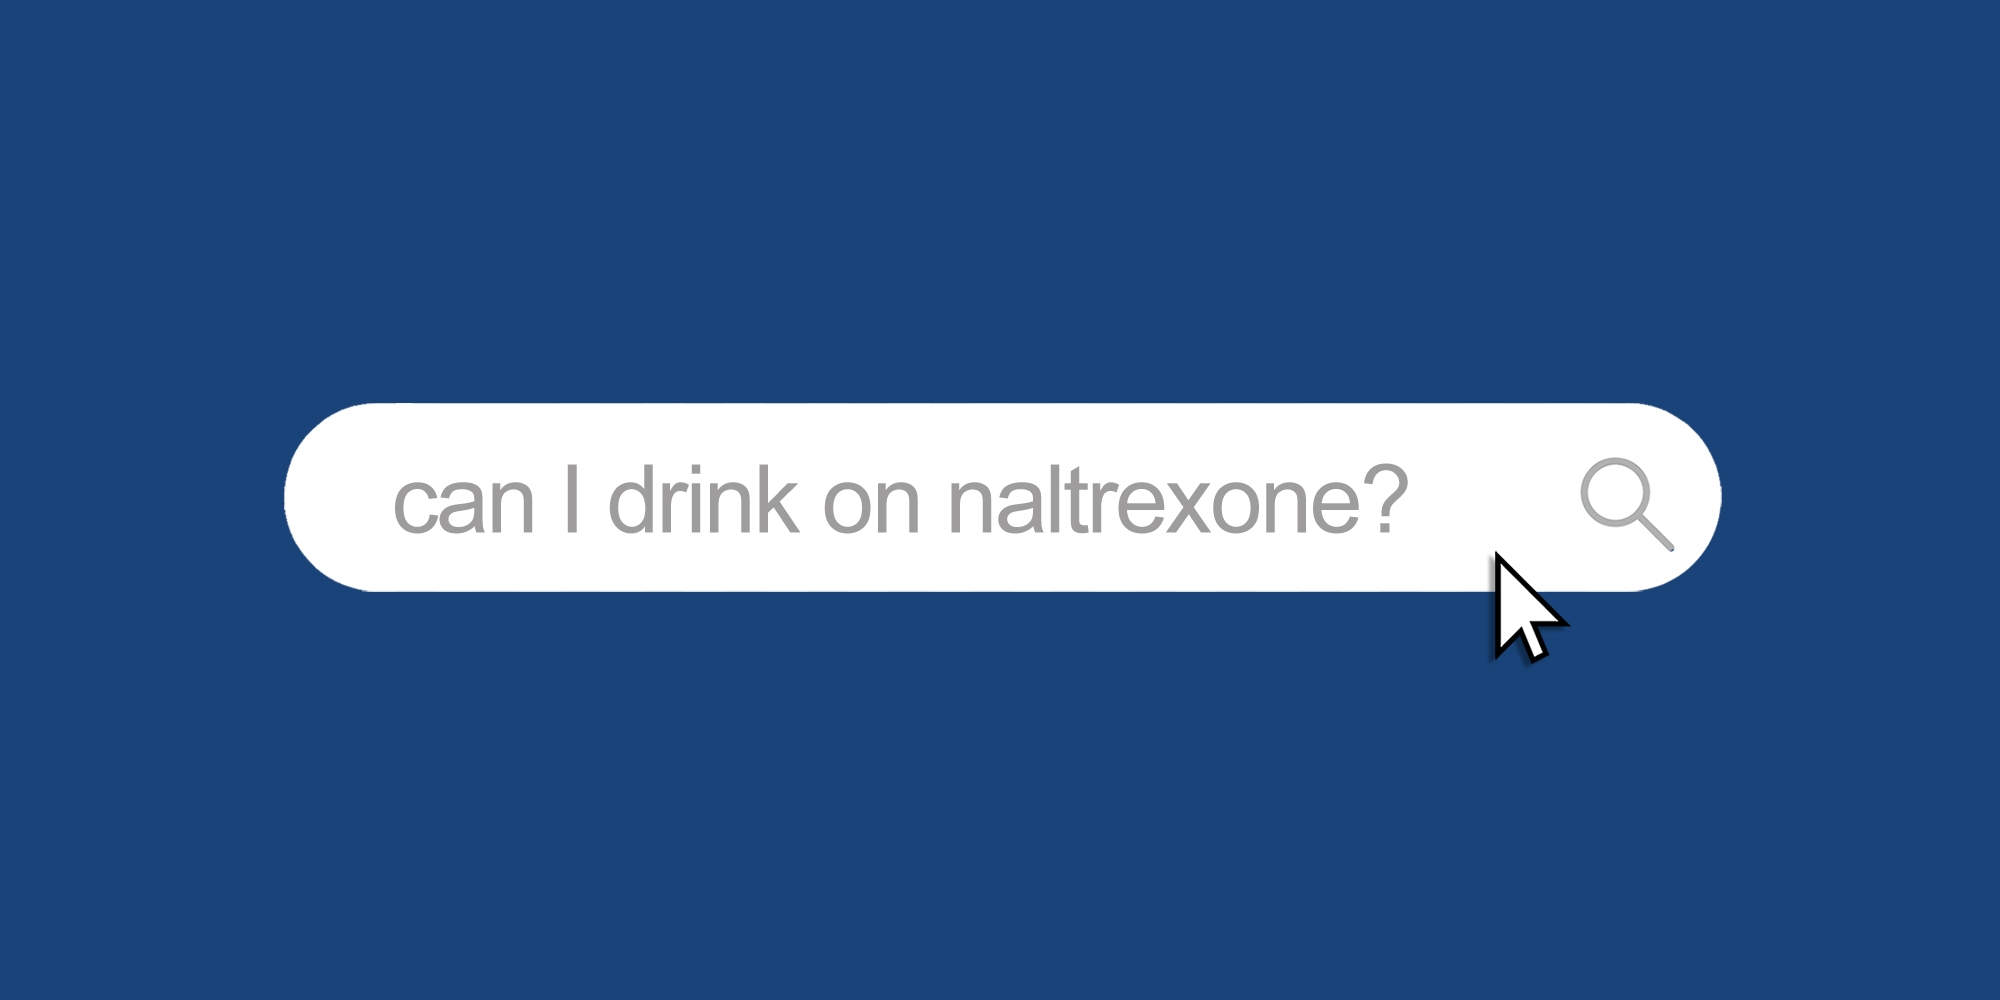 Search bar reading, "Can I drink on naltrexone?"